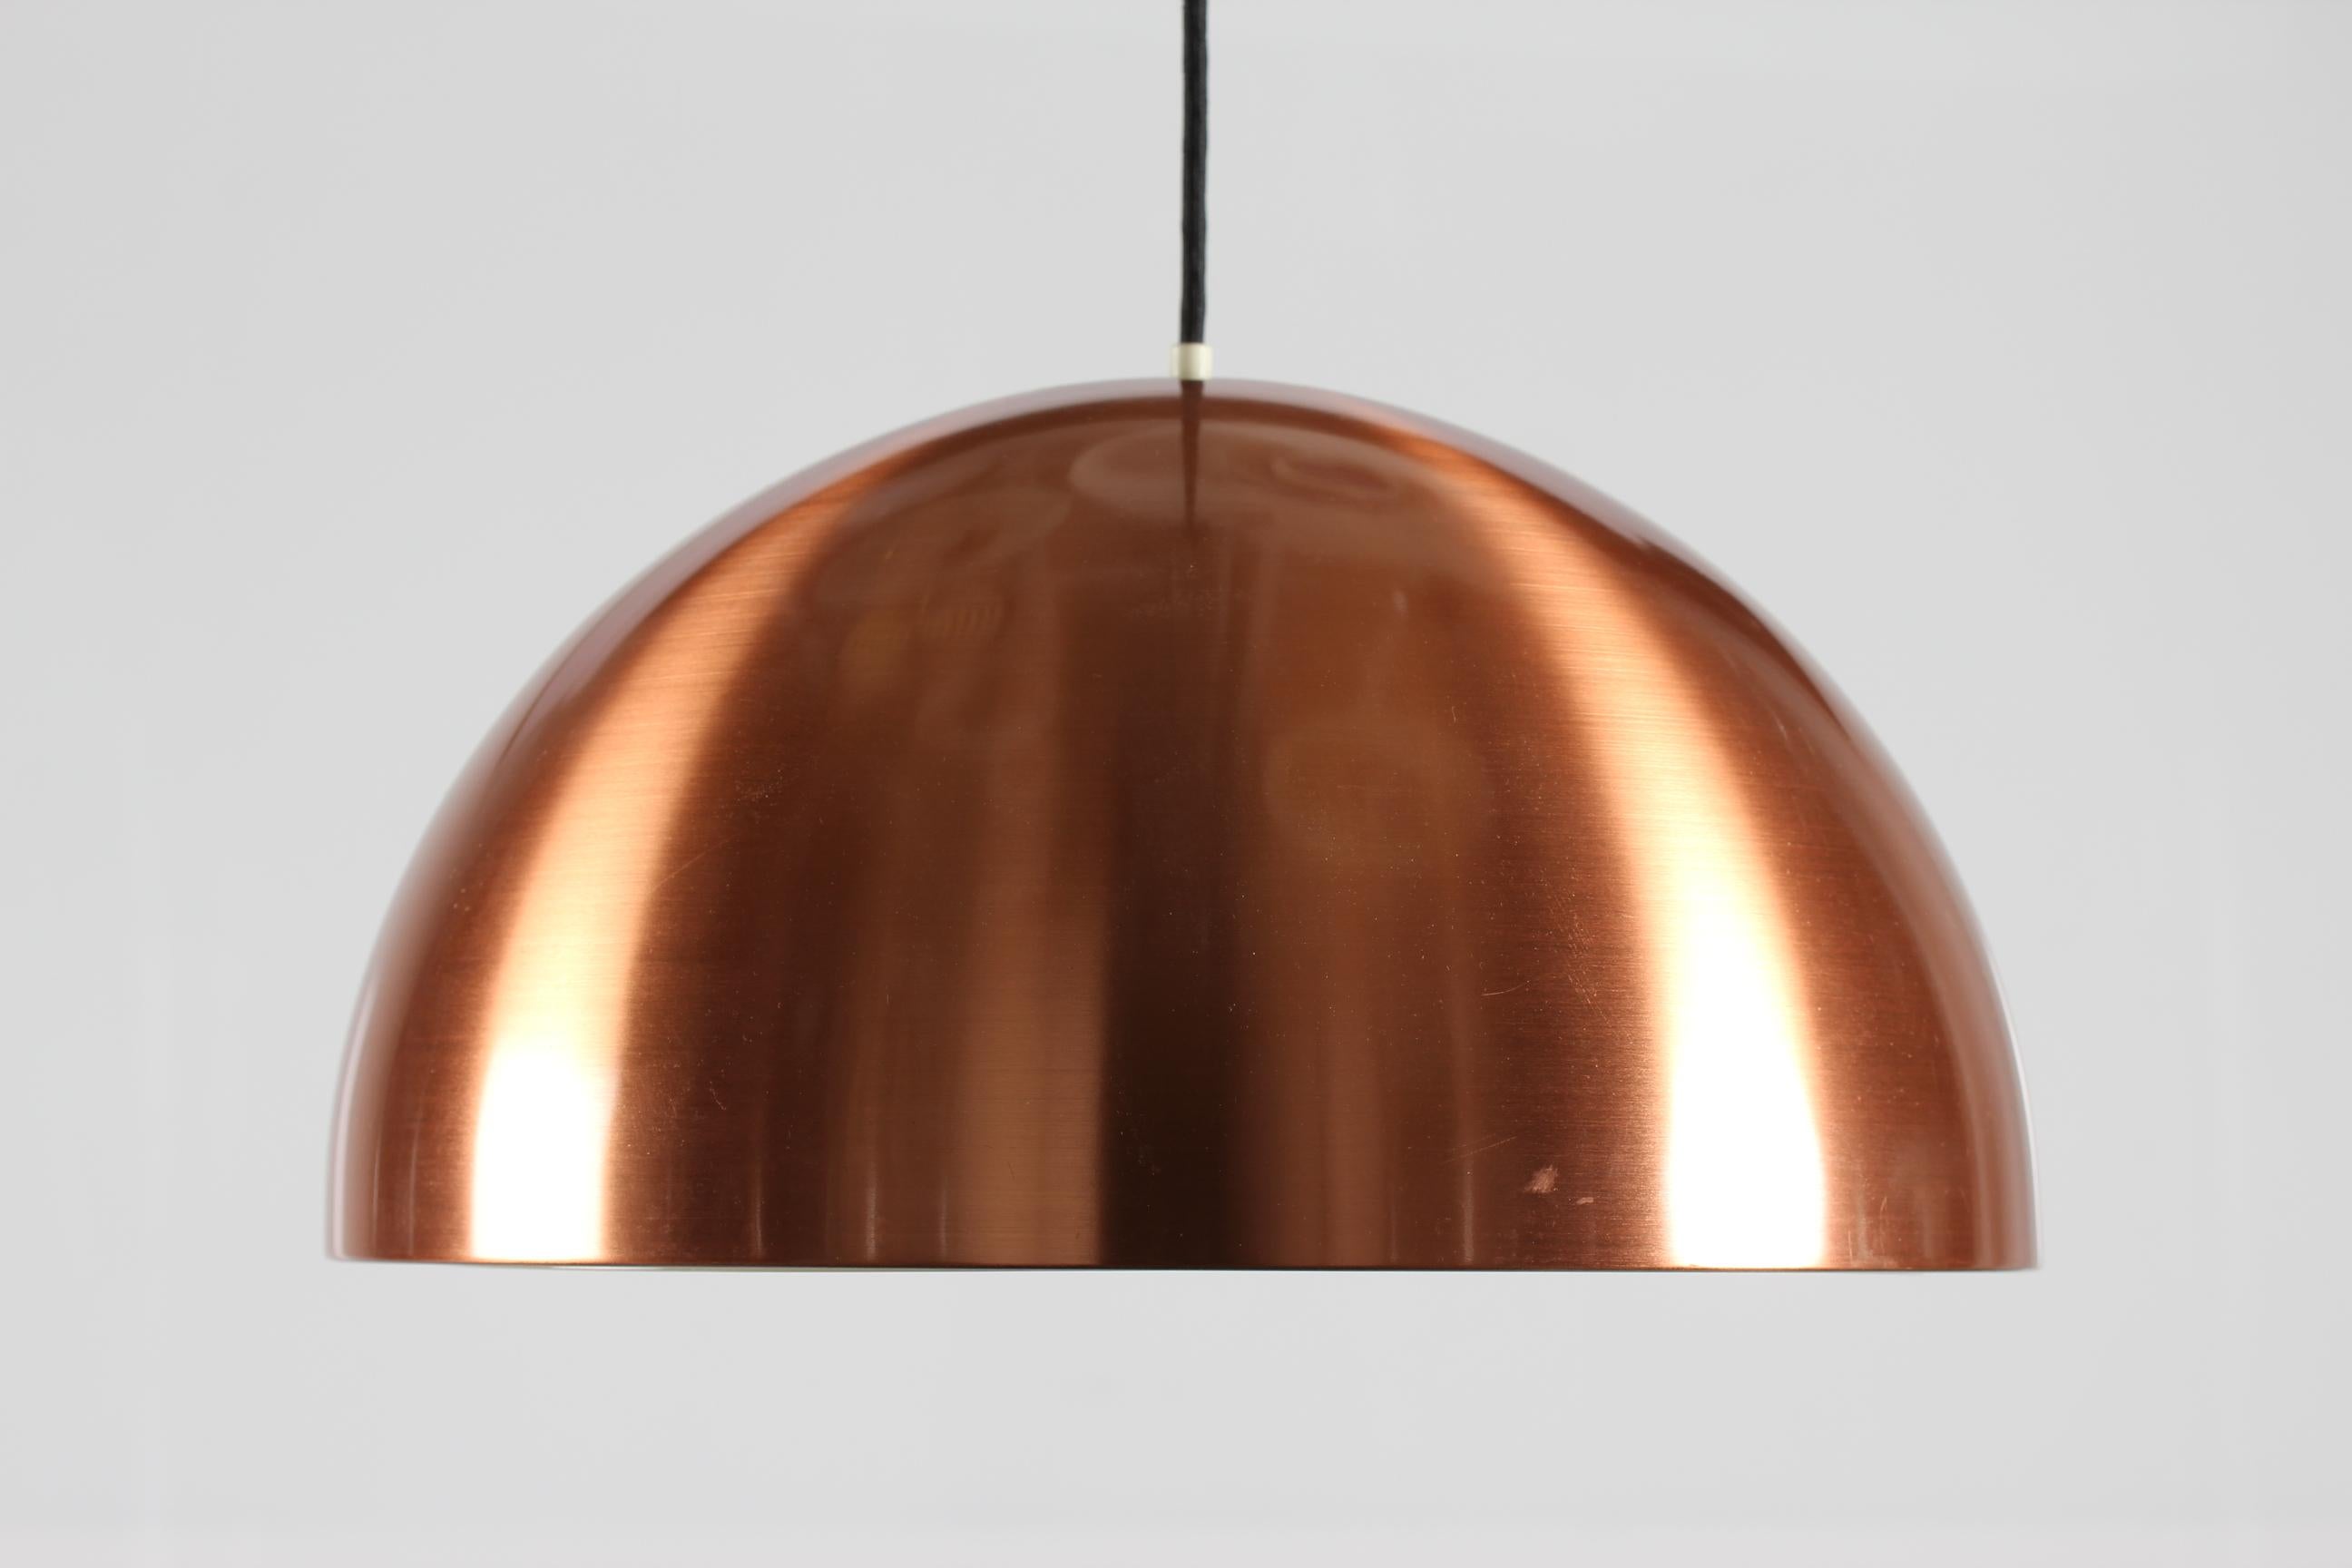 This pendant lamp model Louisiana is designed by the Danish designers Vilhelm Wohlert and Jørgen Bo in 1967 and produced by the Danish lamp manufacturer Louis Poulsen A/S in the late 1960s. The lamp is made of copper with white lacquer inside and